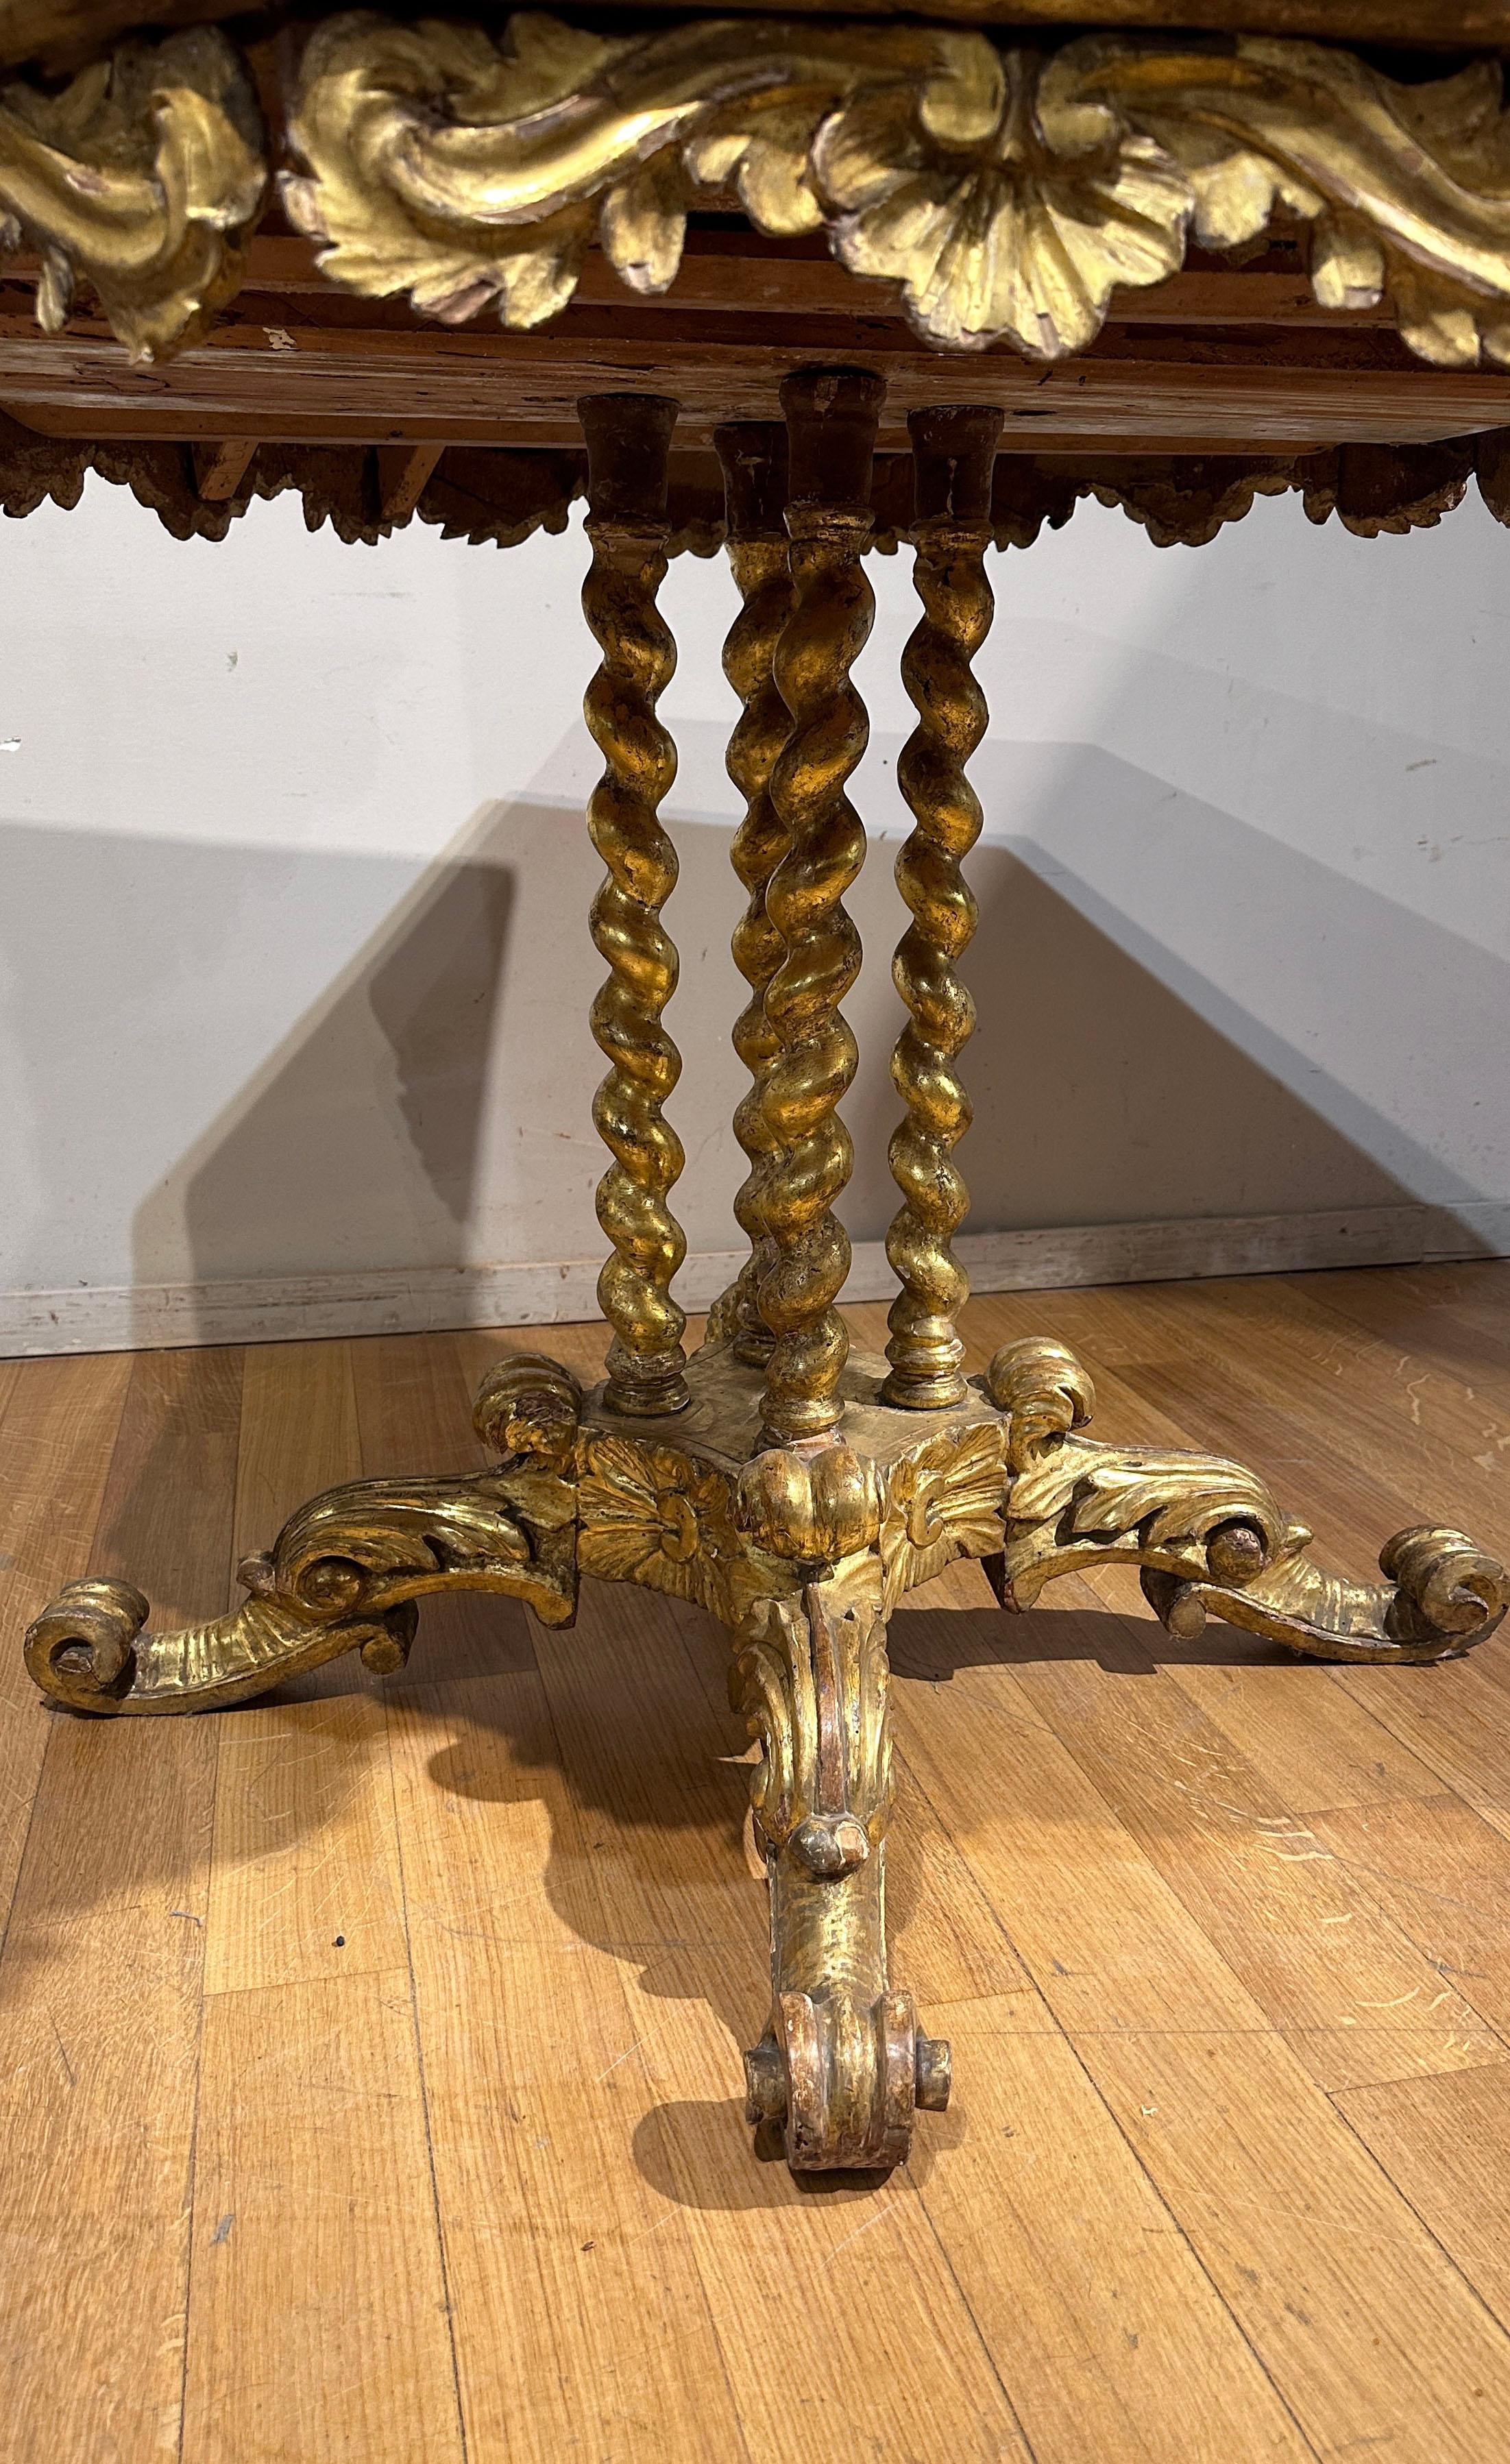 EARLY 19th CENTURY GILDED WOOD TABLE WITH SIMILAR MALACHITE FABRIC im Angebot 1